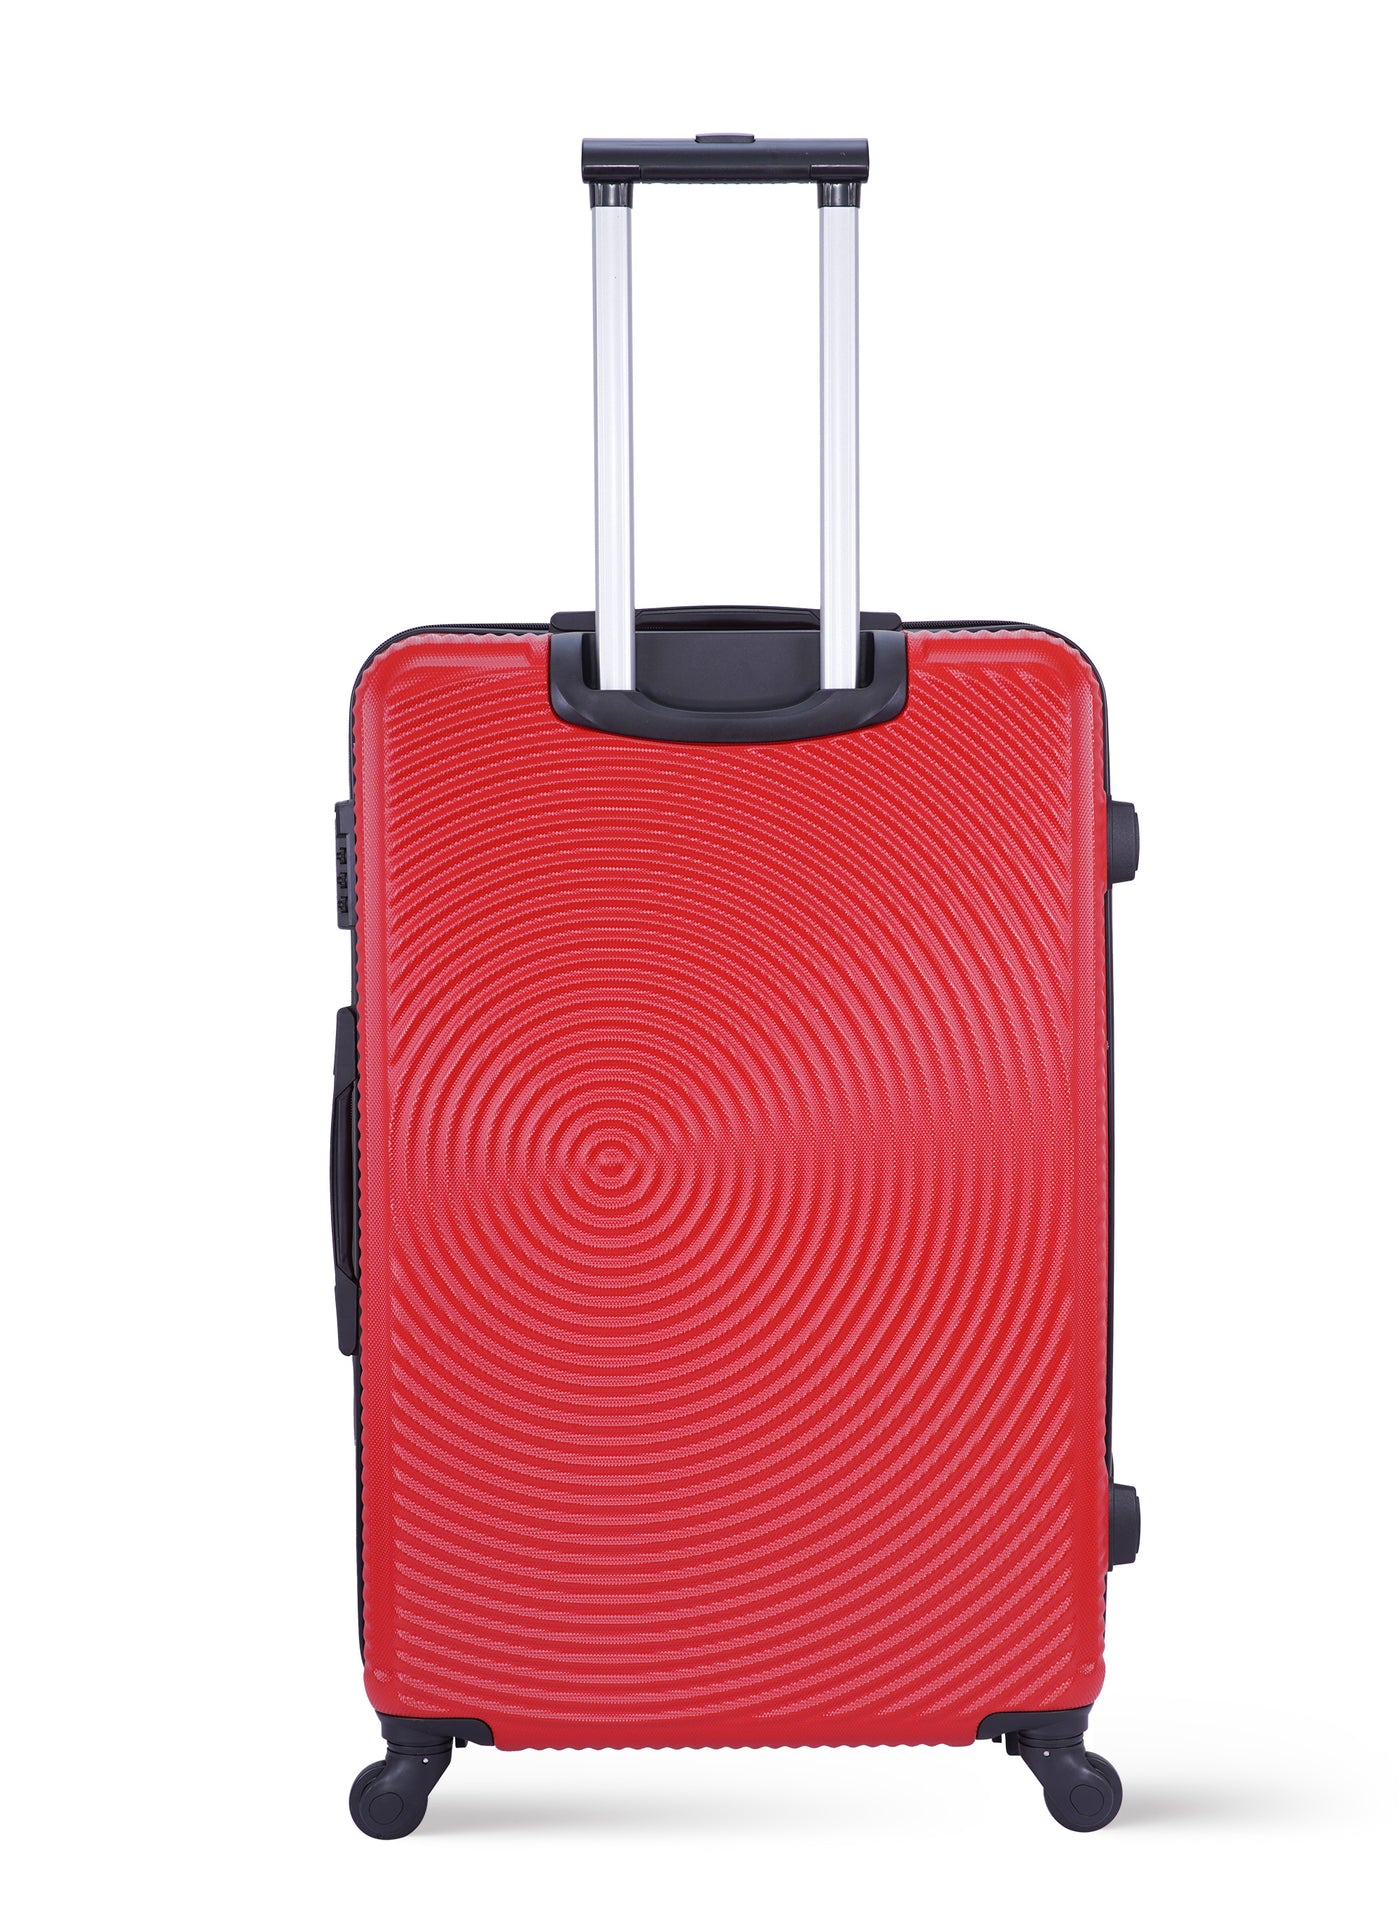 Astro ABS Hardside Spinner Check In Large Luggage Trolley 28 Inch